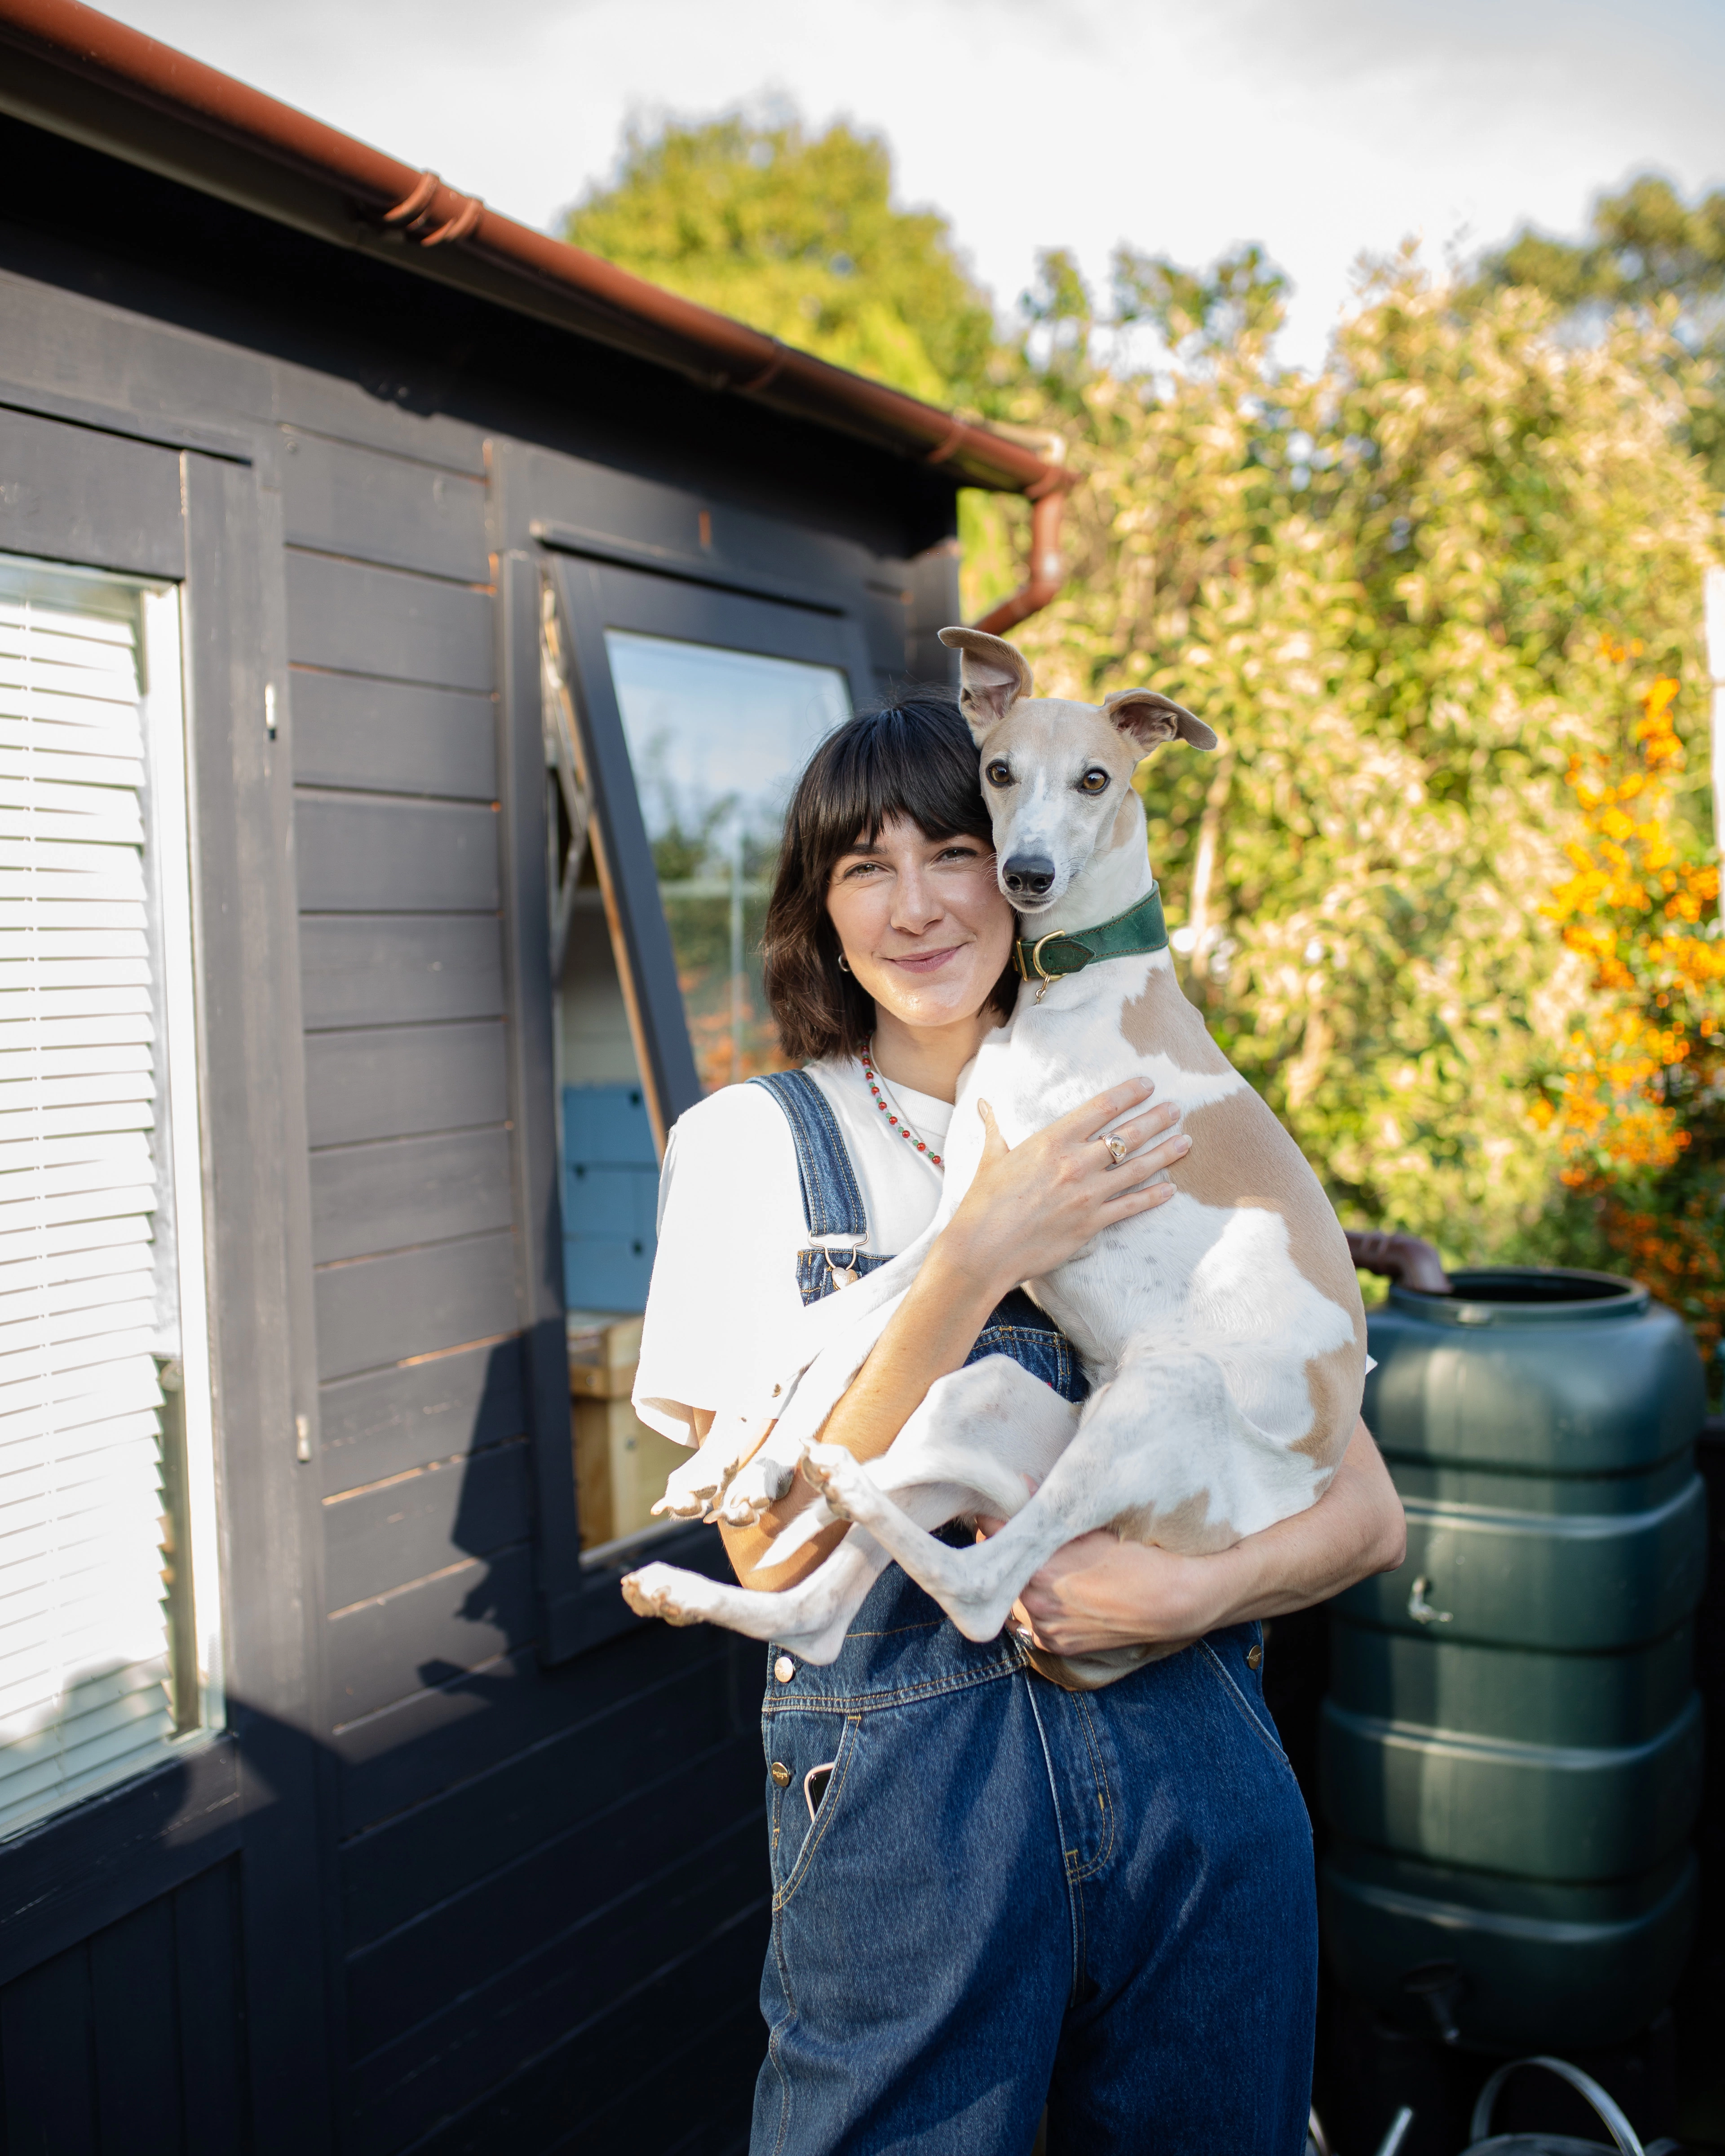 Brooke stands in front of her garden studio holding her whippet, Ralf.